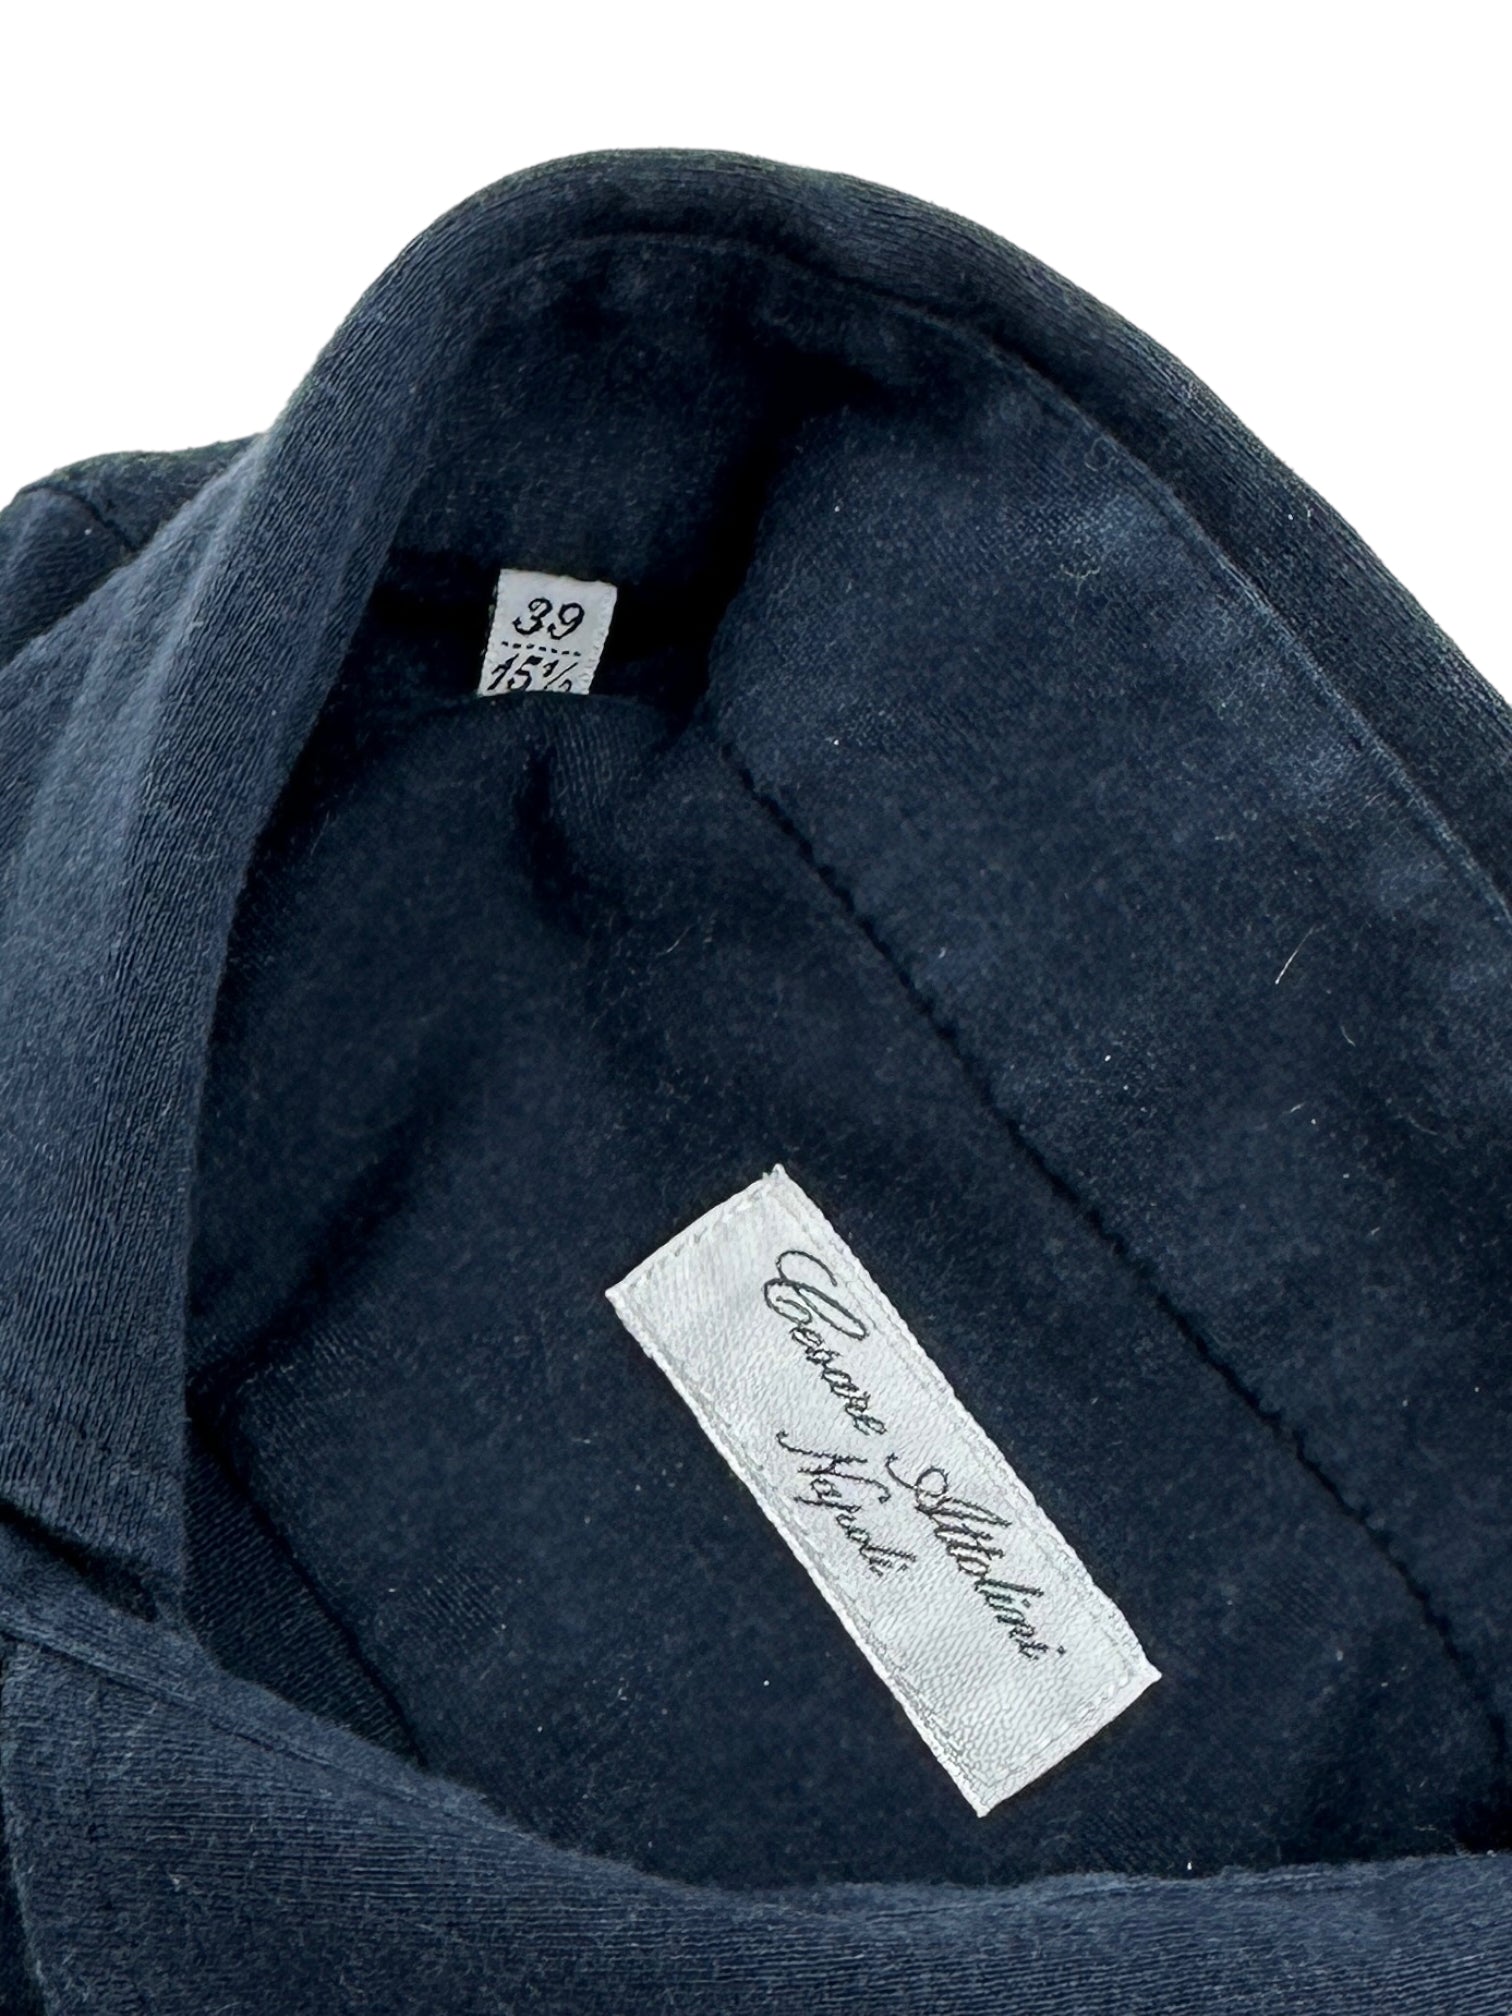 Cesare Attolini Navy Knitted Shirt